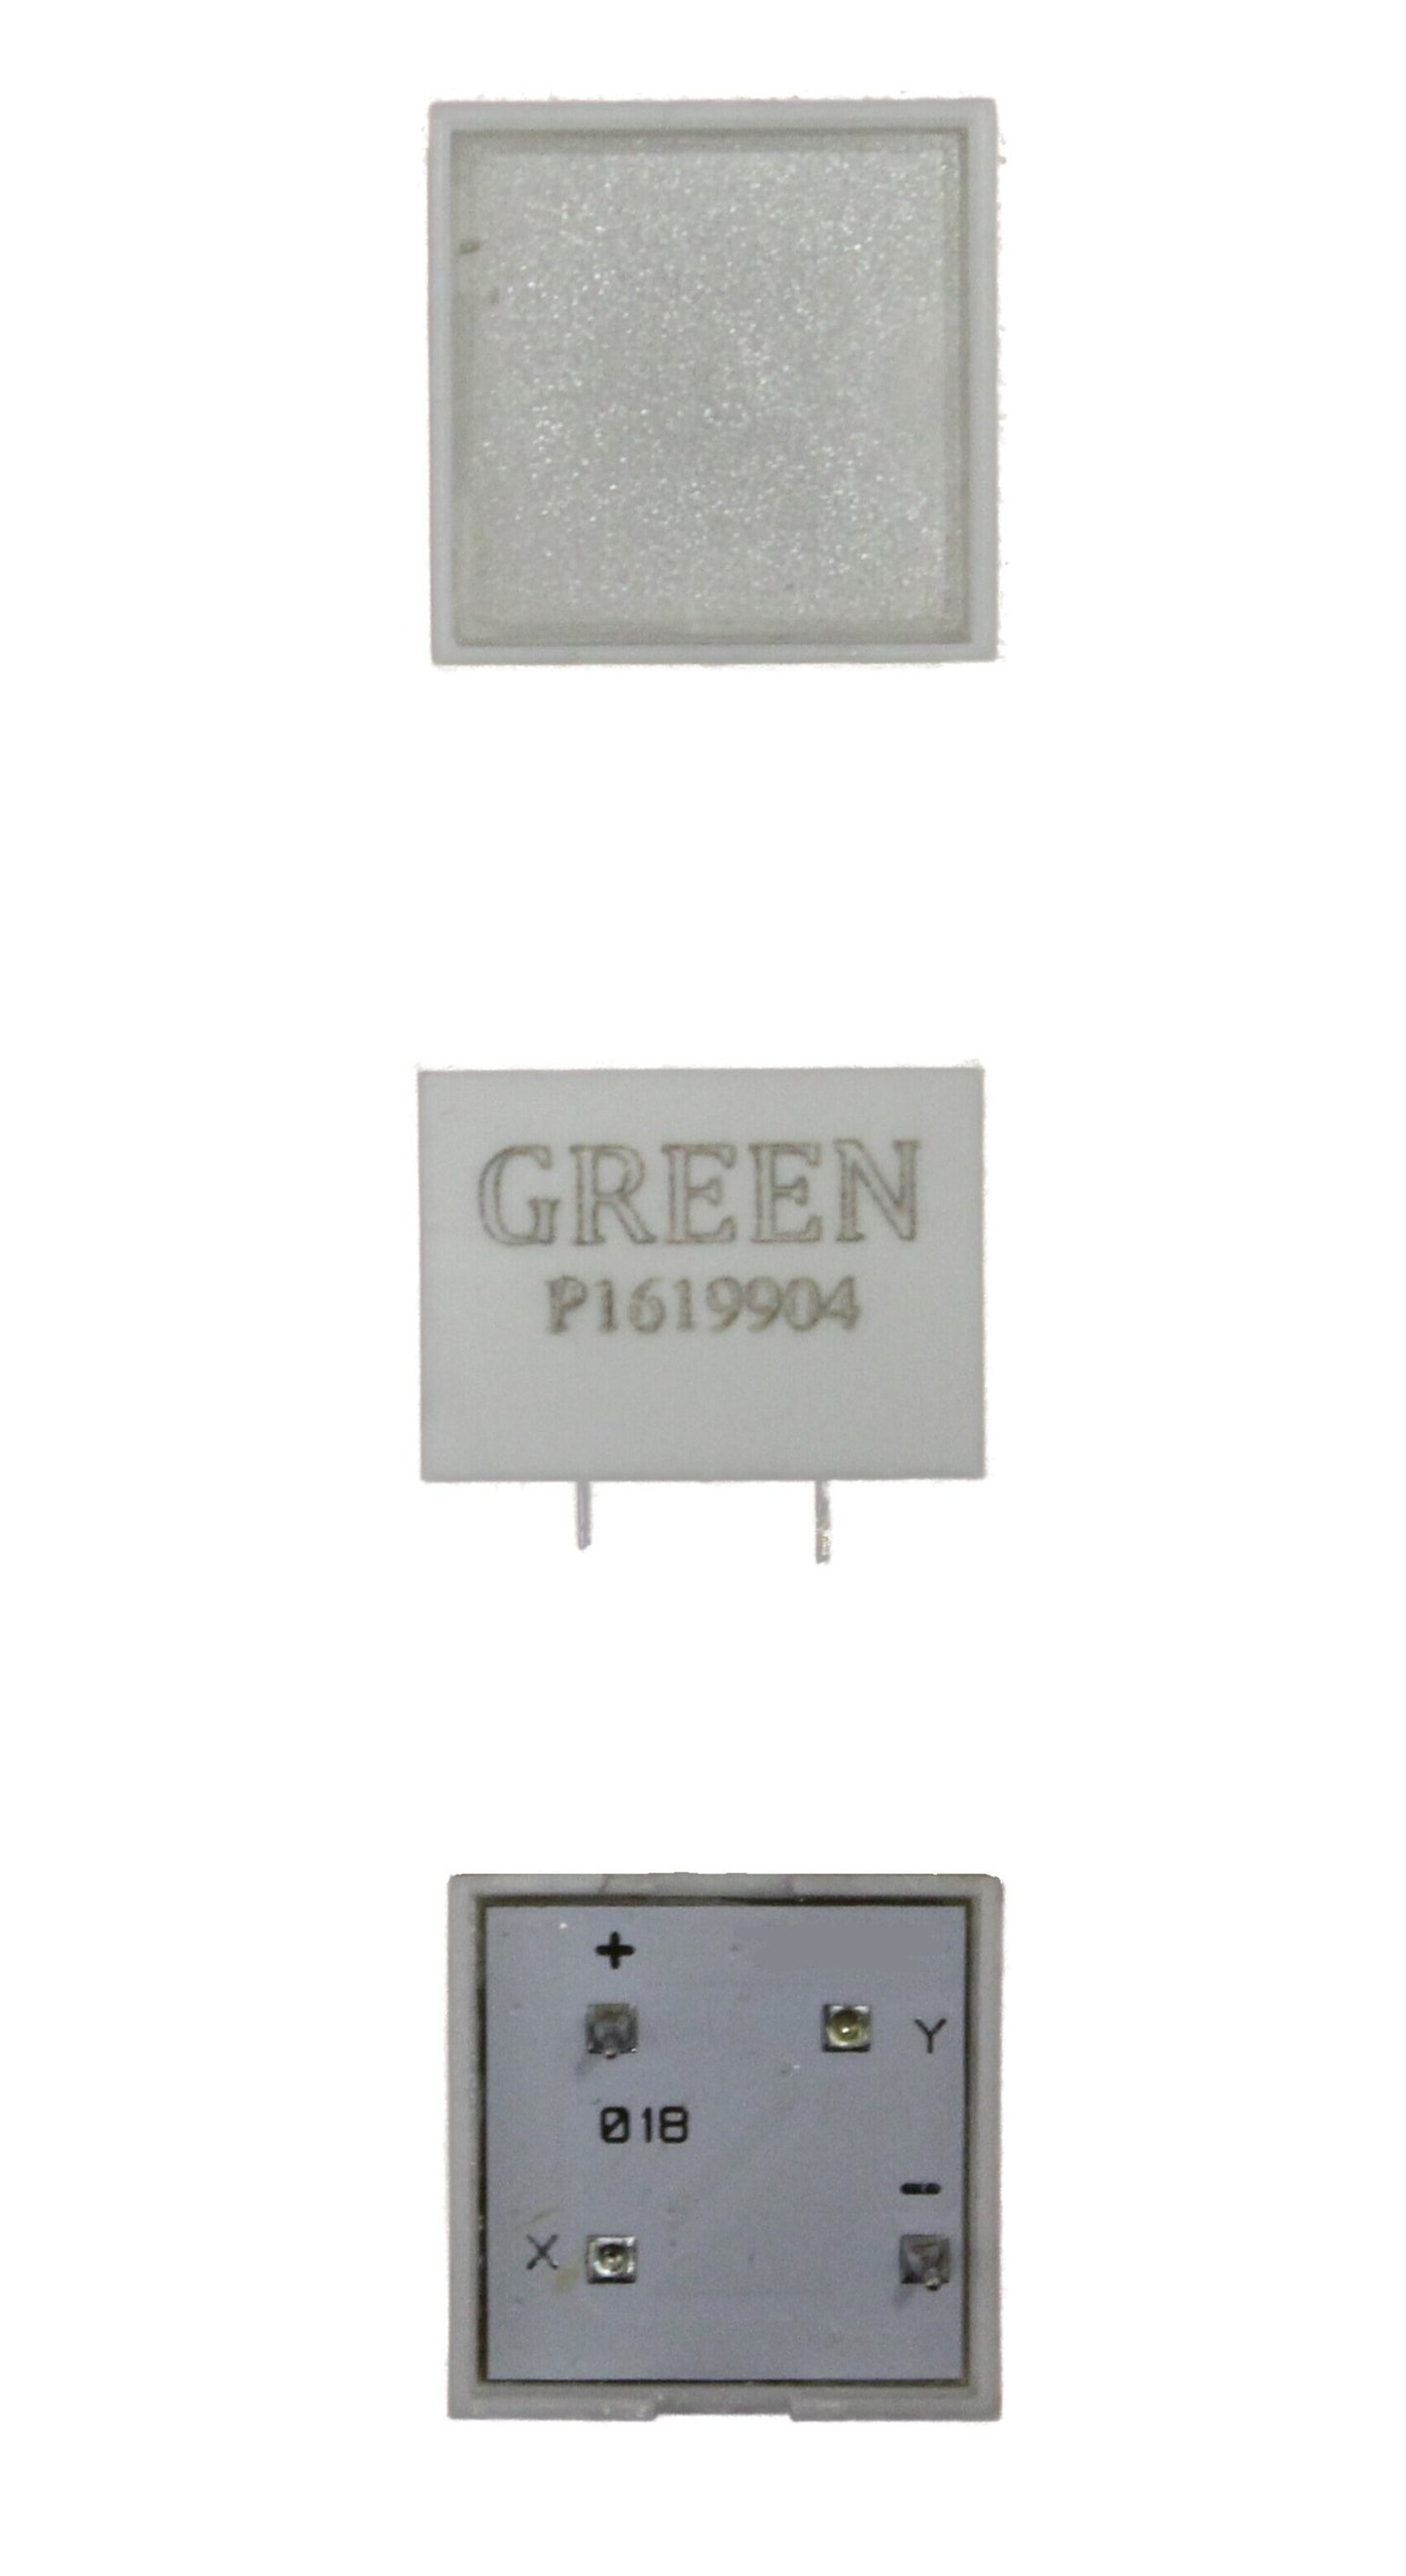 Green Led Replacement for Avancity Panel - Vivacity